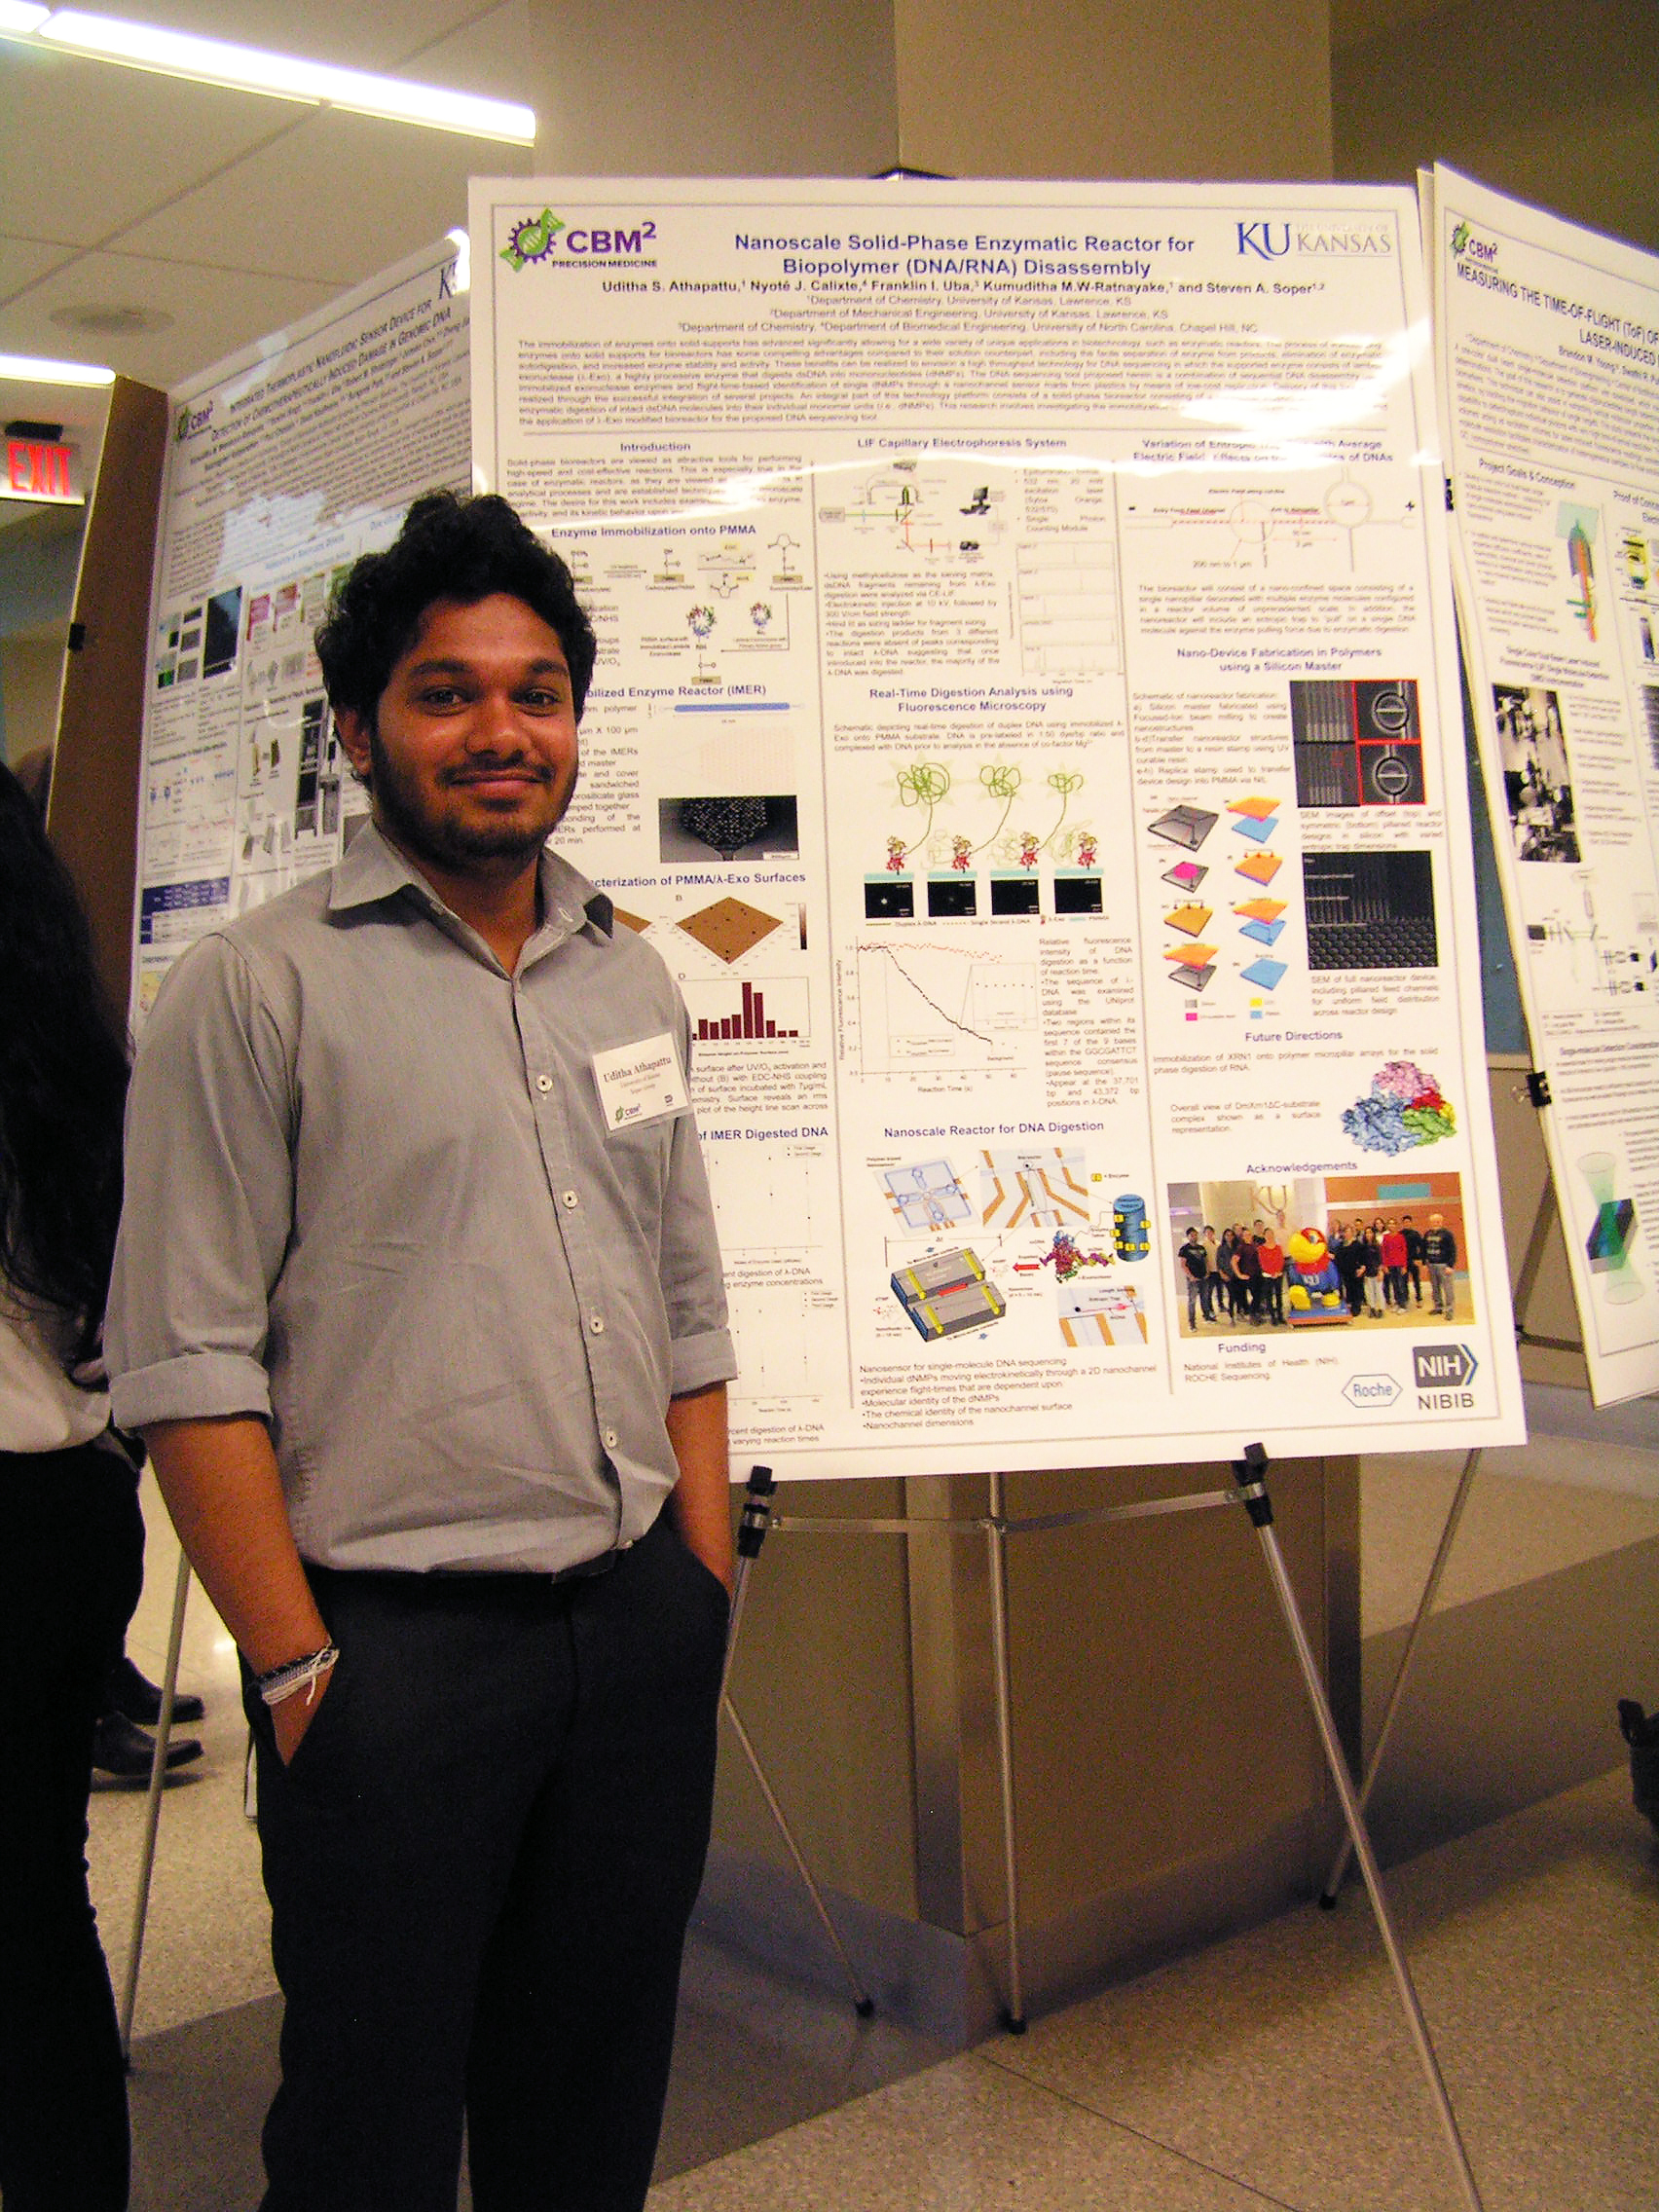 Single student positioned beside their research poster on display.